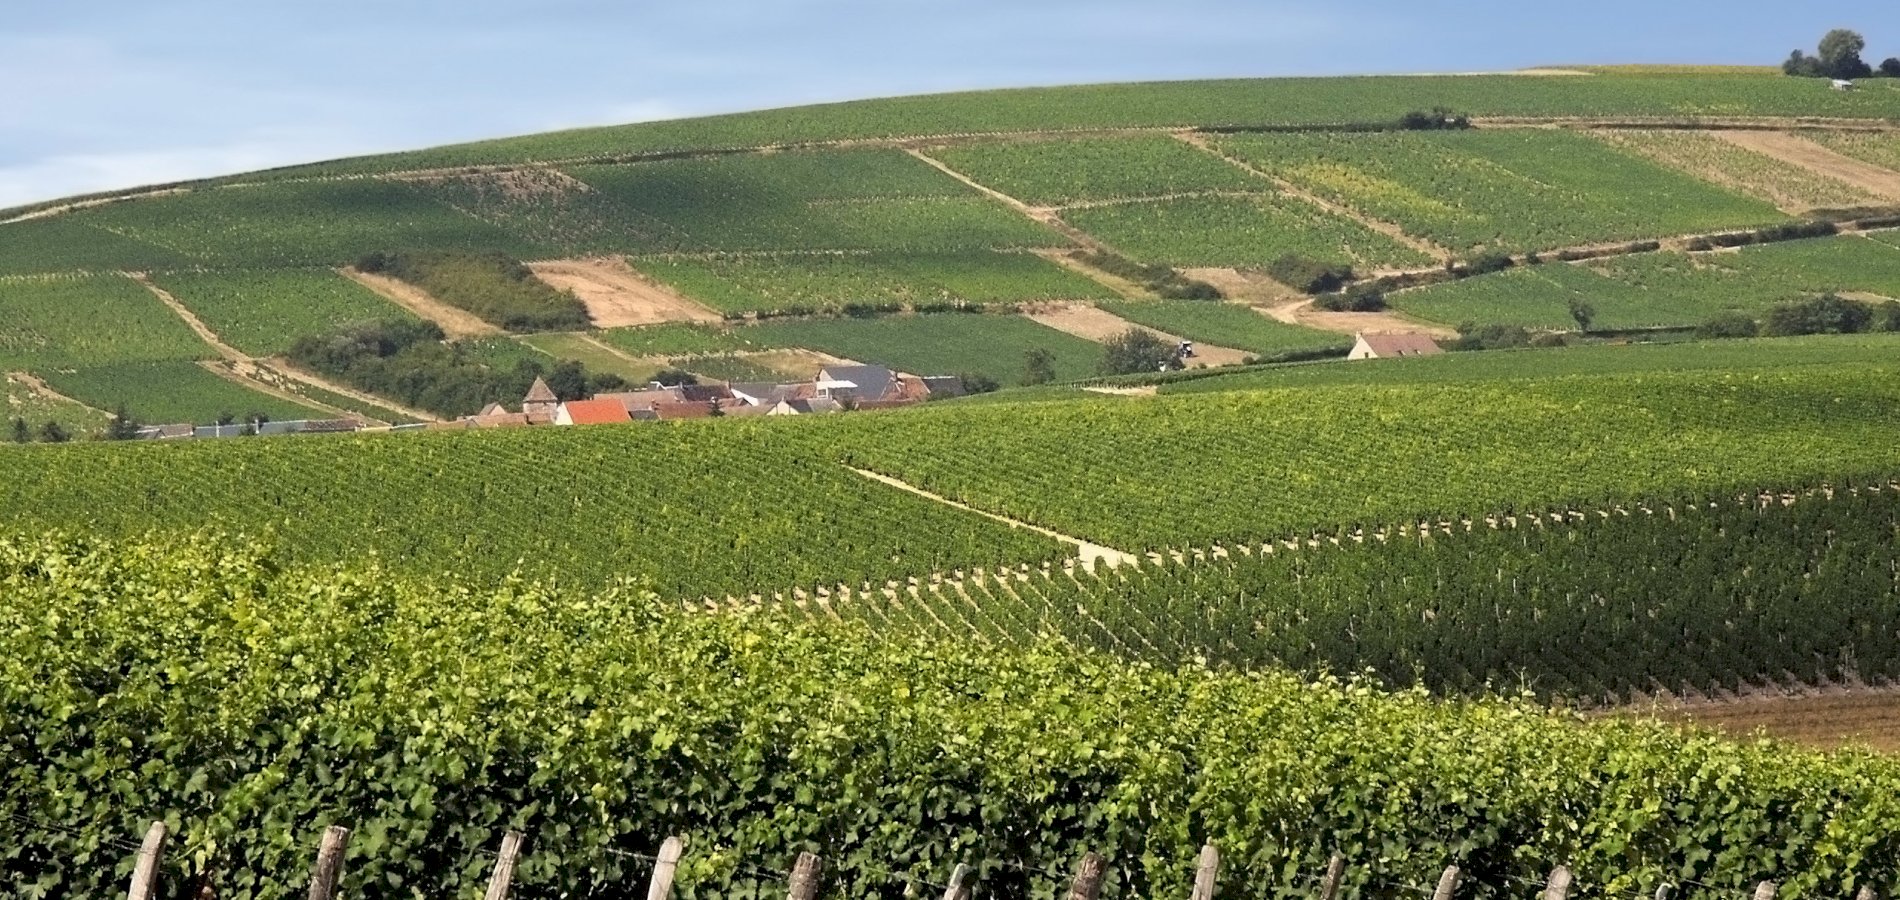 Ophorus Tours - A Private Loire Valley Wine Tour from Tours to Chinon & Bourgueil vineyards